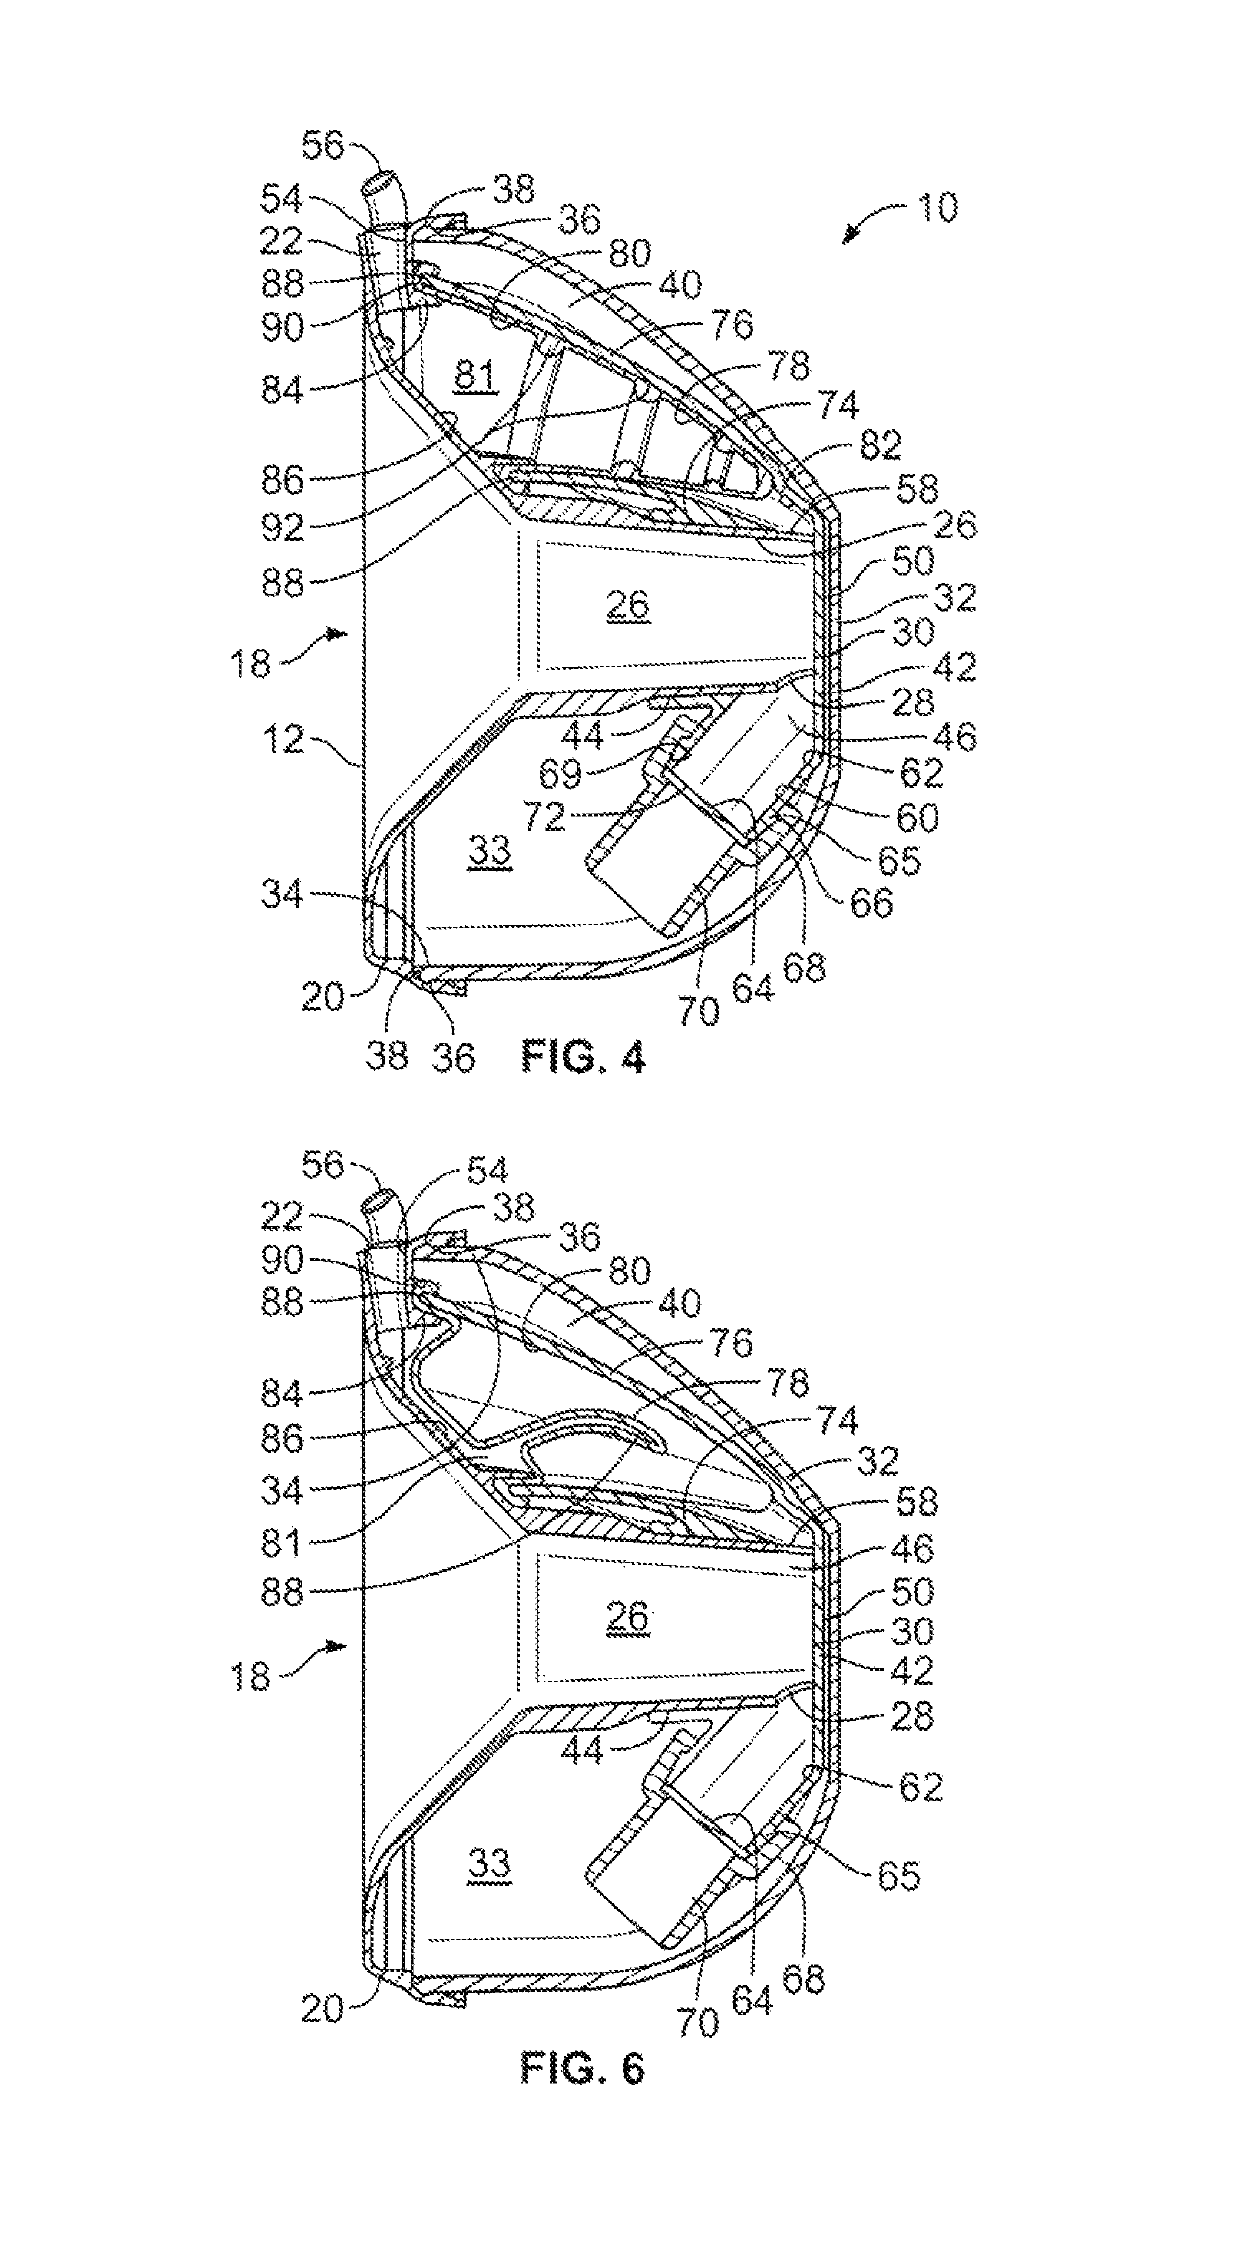 Submersible breast pump protection mechanism for a breast milk collection device with self-contained reservoir